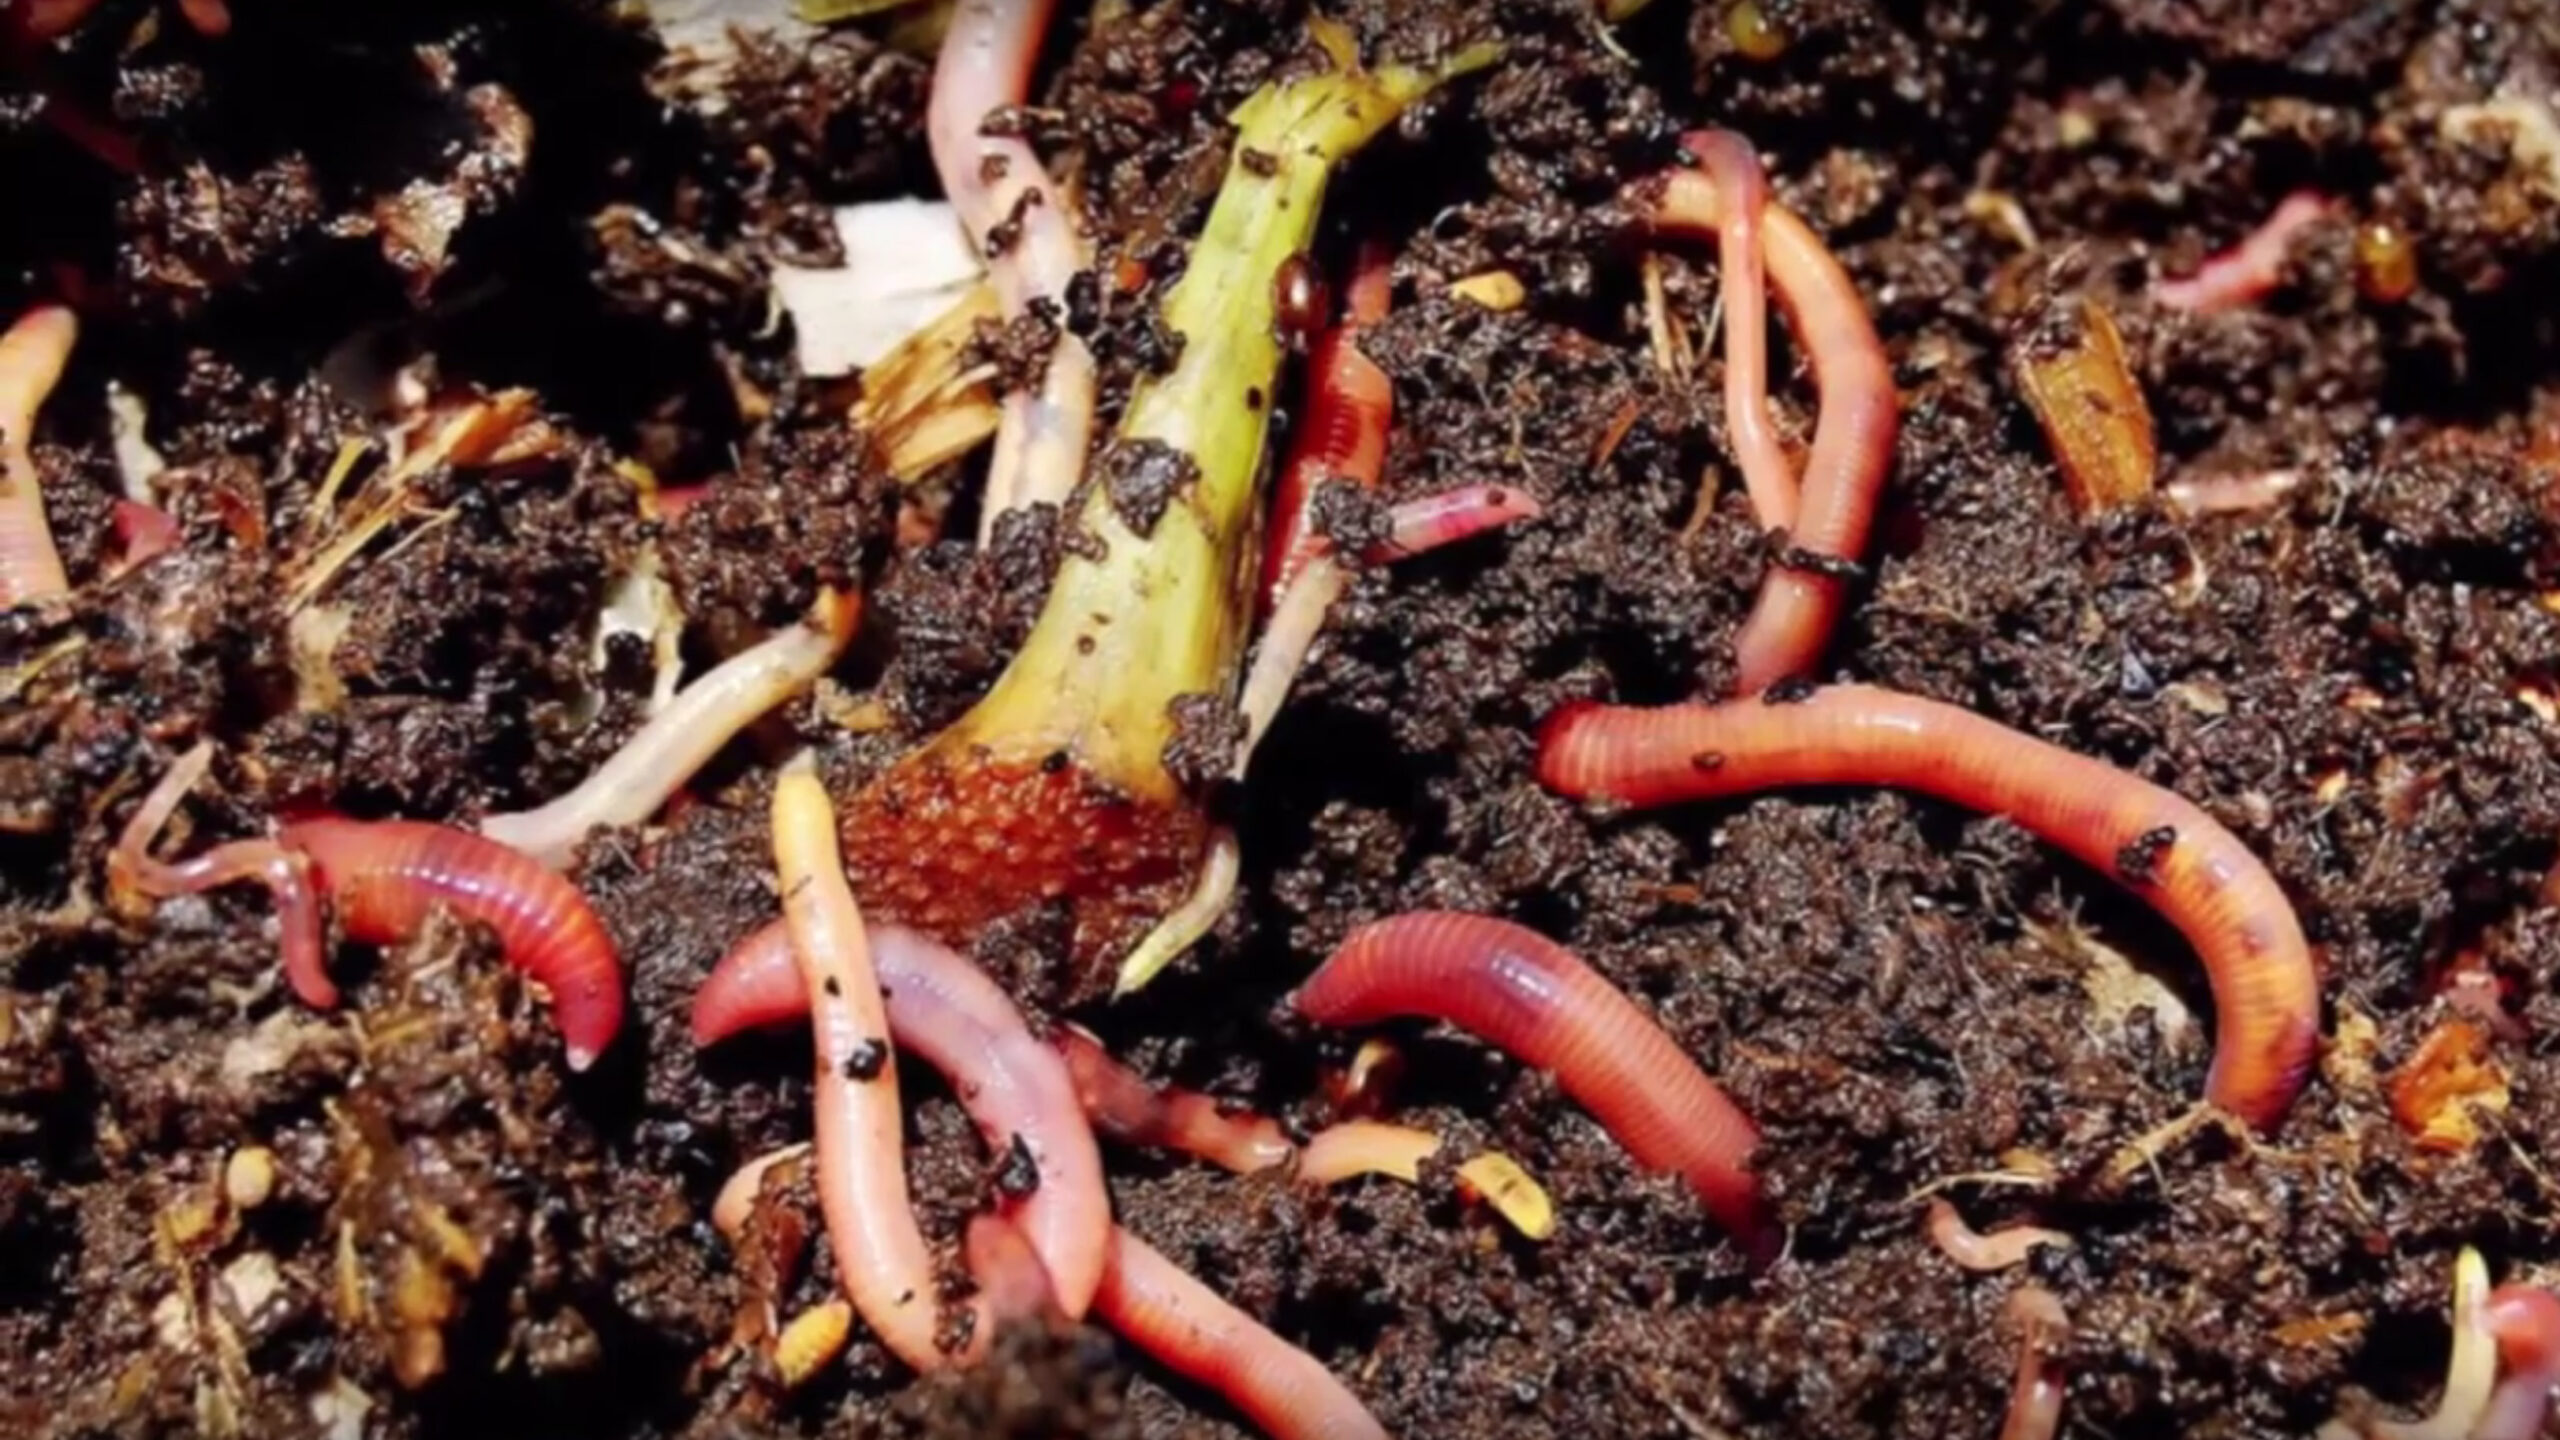 Worms in a compost bin with food scraps and soil